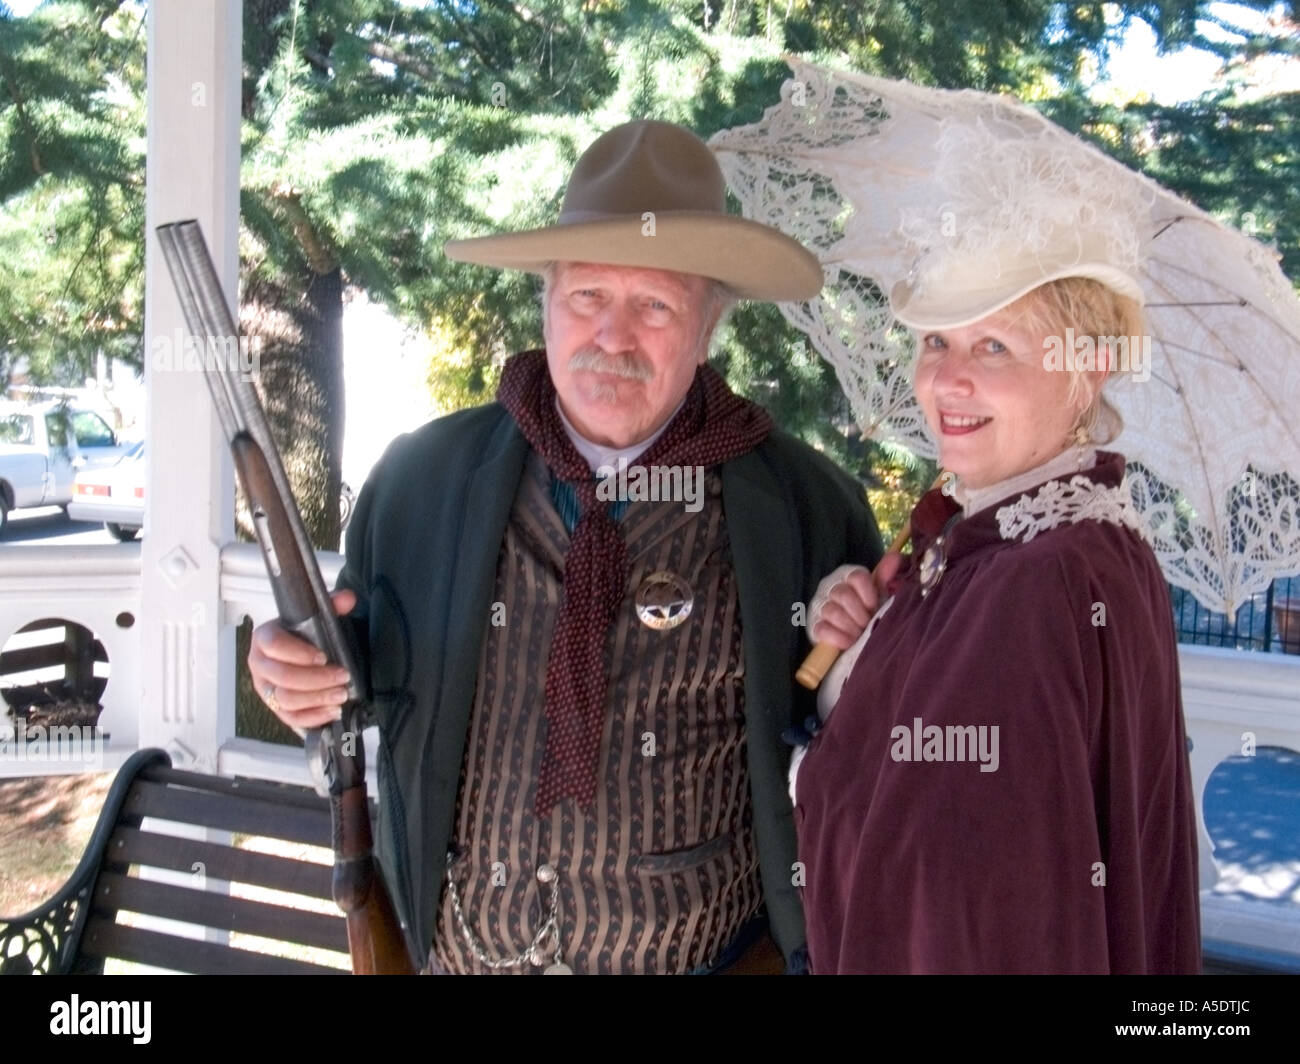 Actors/performers dressed in period costumes from the California Gold Rush Stock Photo